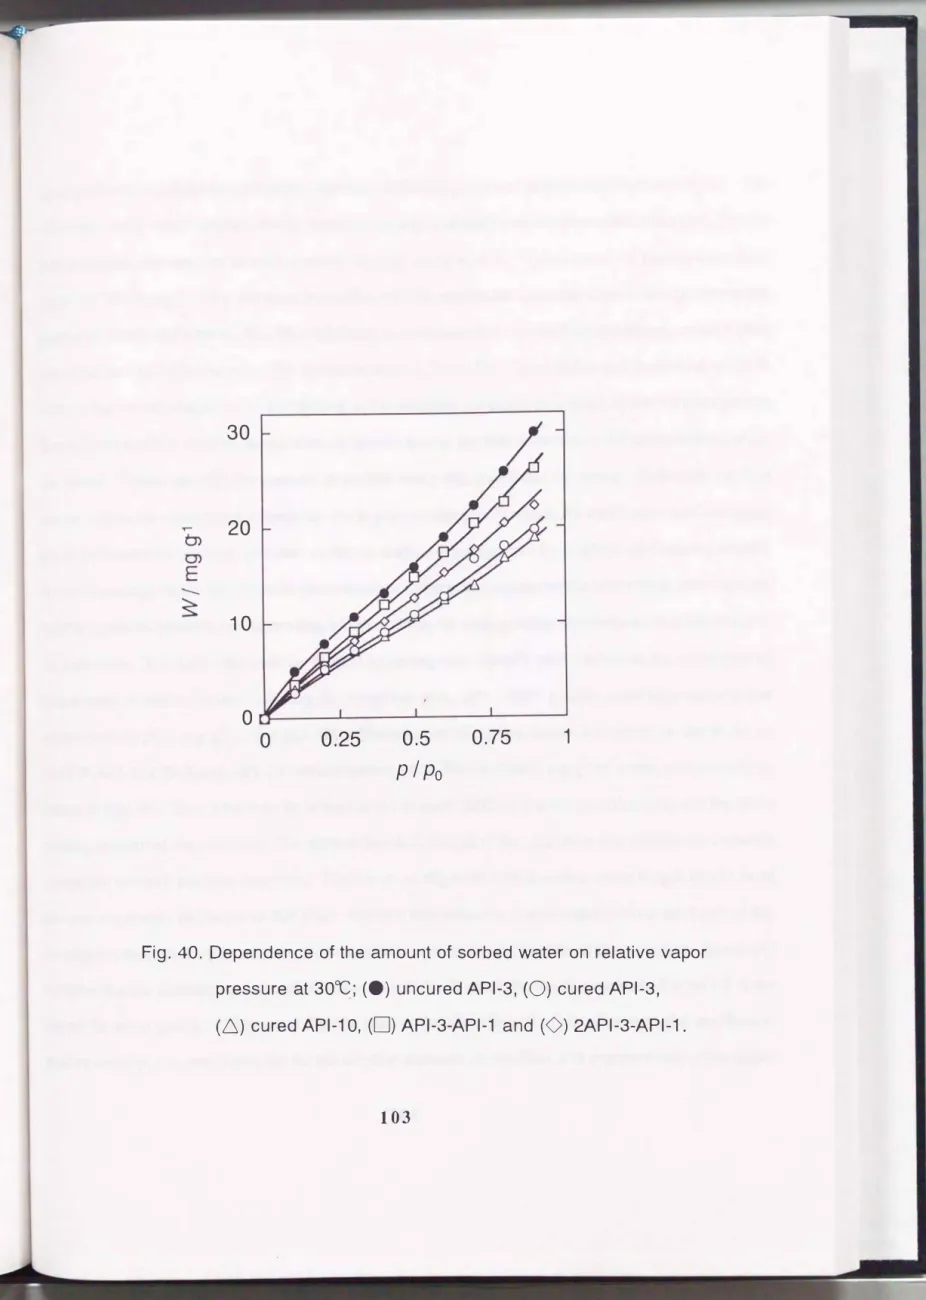 Fig.  40.  Dependence of the amount of sorbed water on relative vapor  pressure at  300C;  (e) uncured  API-3,  (0) cured  API-3, 